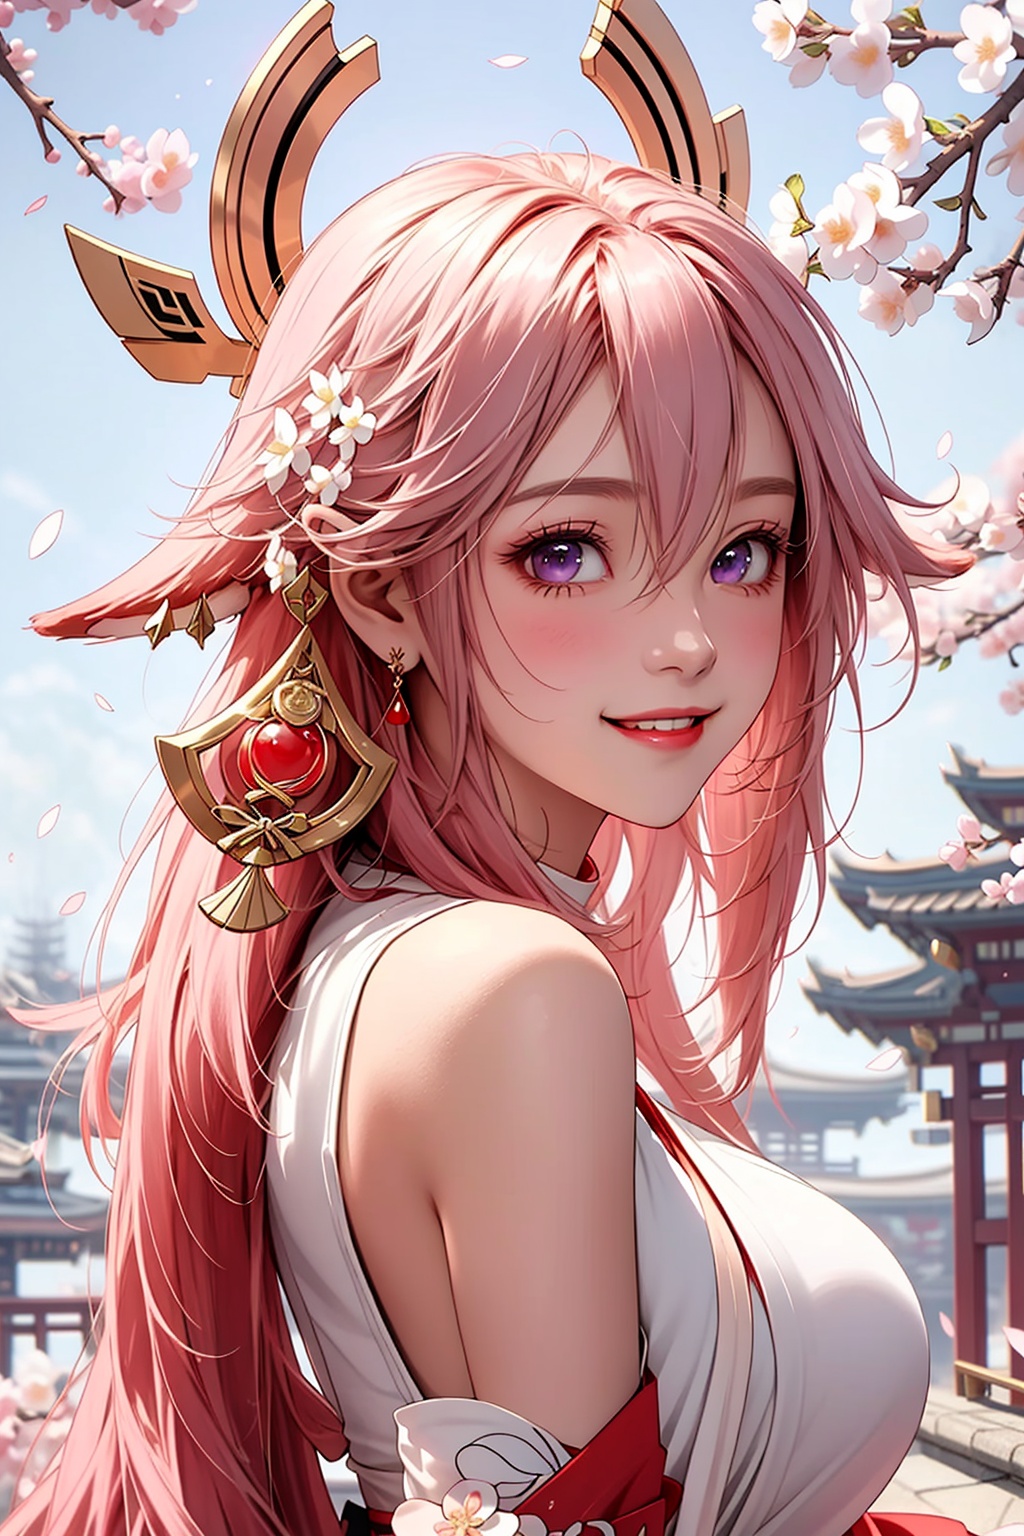 ba shen zi,1girl,solo,pink hair,purple eyes,long hair,hair ornament,animal ears,breasts,bare shoulders,blush,fox ears,jewelry,hair between eyes,bangs,upper body,smile,flower,japanese clothes,cherry blossoms,hair flower,parted lips,earrings,cheerful demeanor,radiant smile,bright personality,warm-hearted nature,optimistic outlook,vibrant energy,sun-kissed complexion,free-spirited,carefree attitude,uplifting presence,positive vibes,lively enthusiasm,beaming with happiness,natural beauty,sunshine in her eyes,infectious laughter,<lora:aki-000008:0.7>,